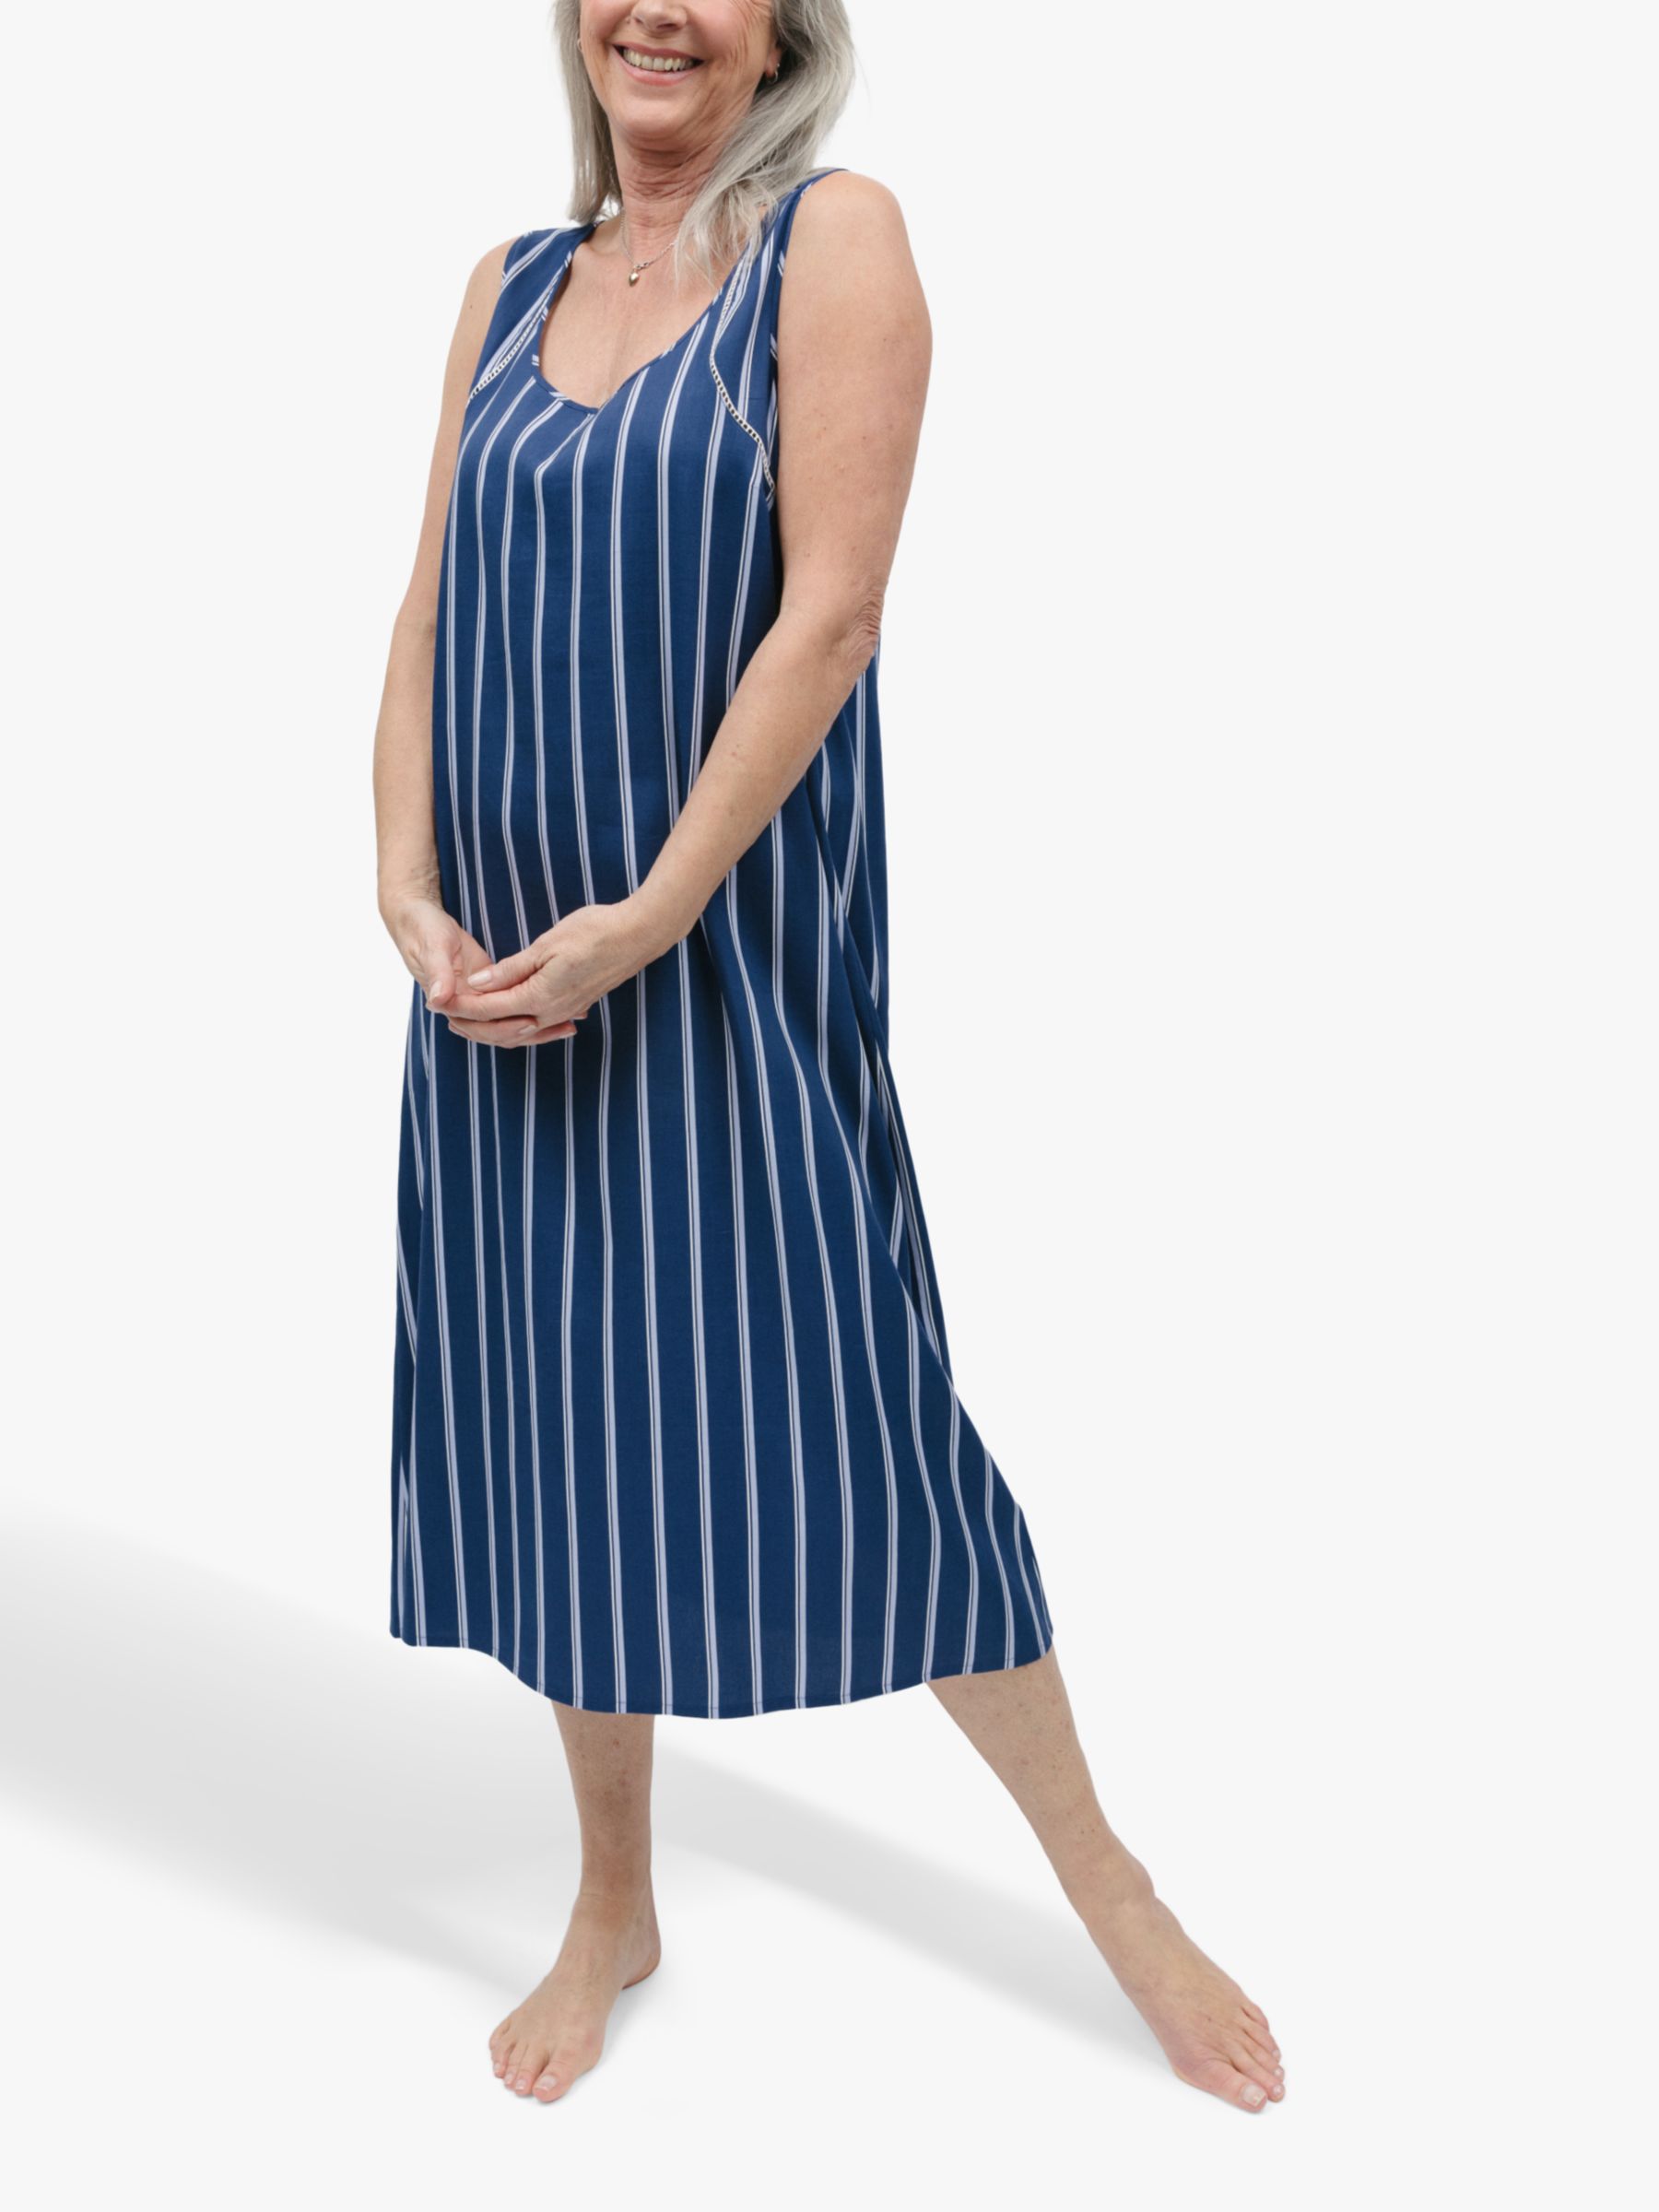 Buy Nora Rose by Cyberjammies Evette Striped Long Nightdress, Blue Online at johnlewis.com